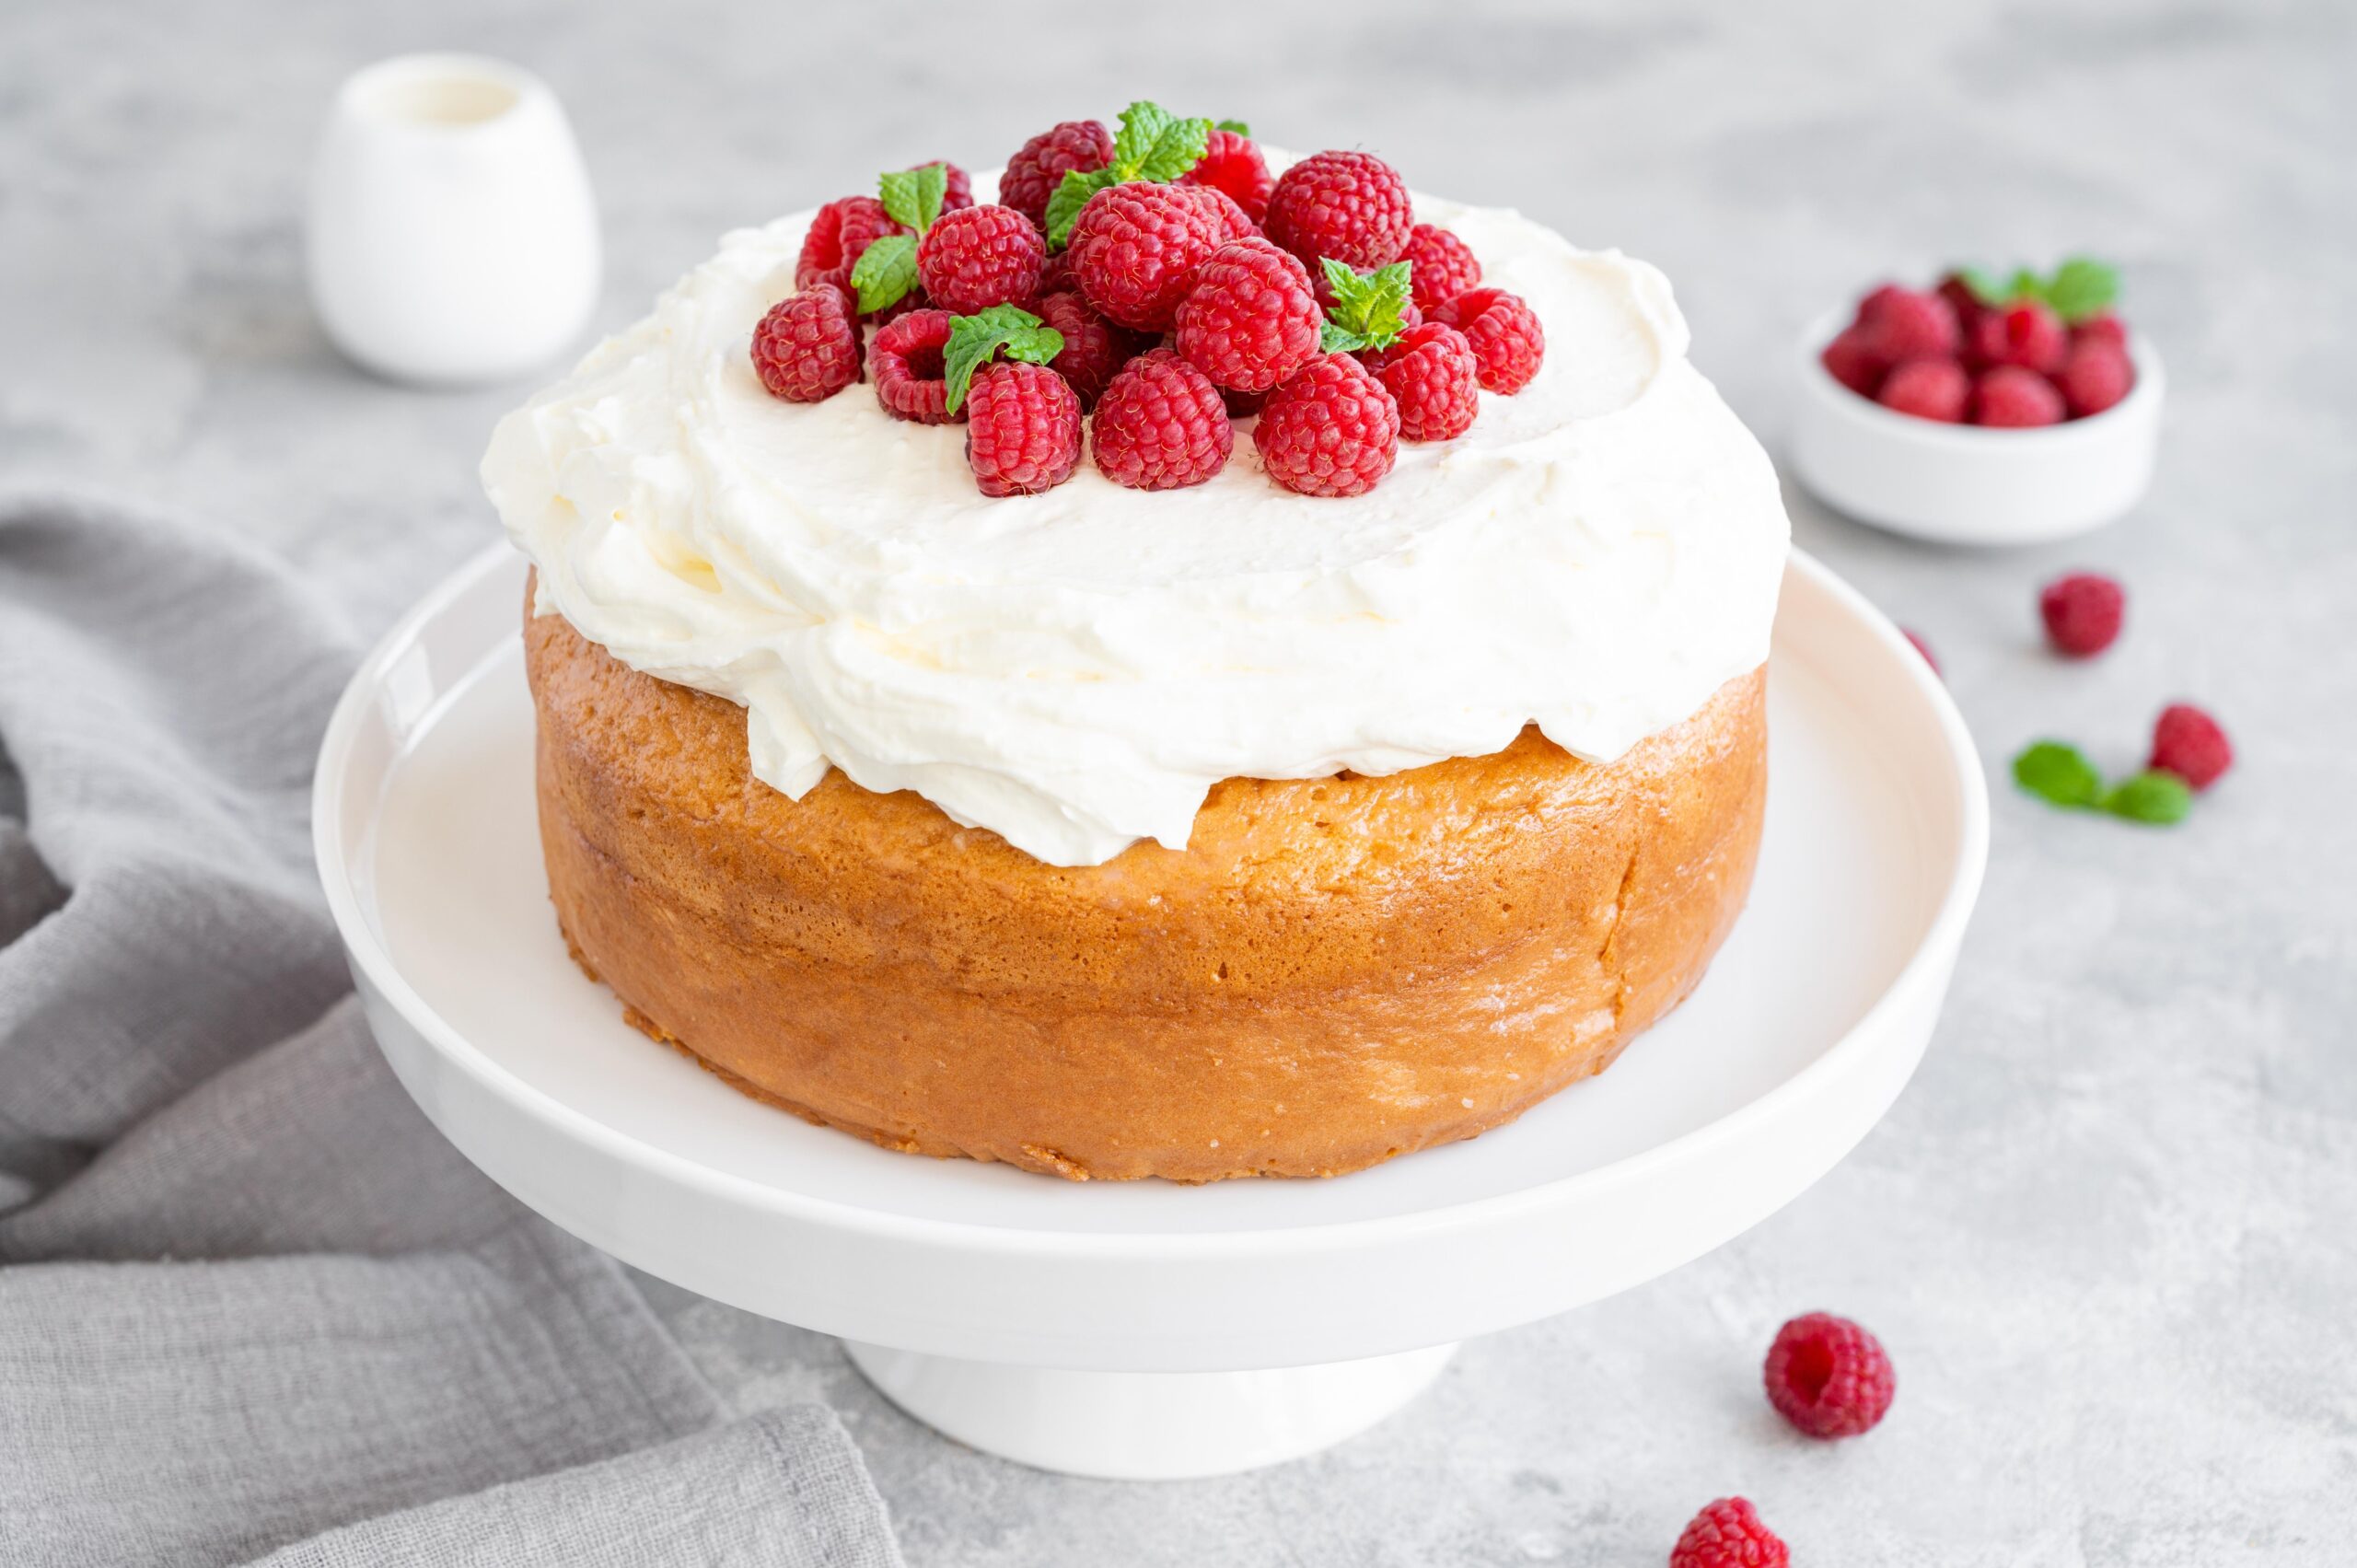  A drizzle of three types of milk makes this cake fluffy, decadent, and wildly delicious.